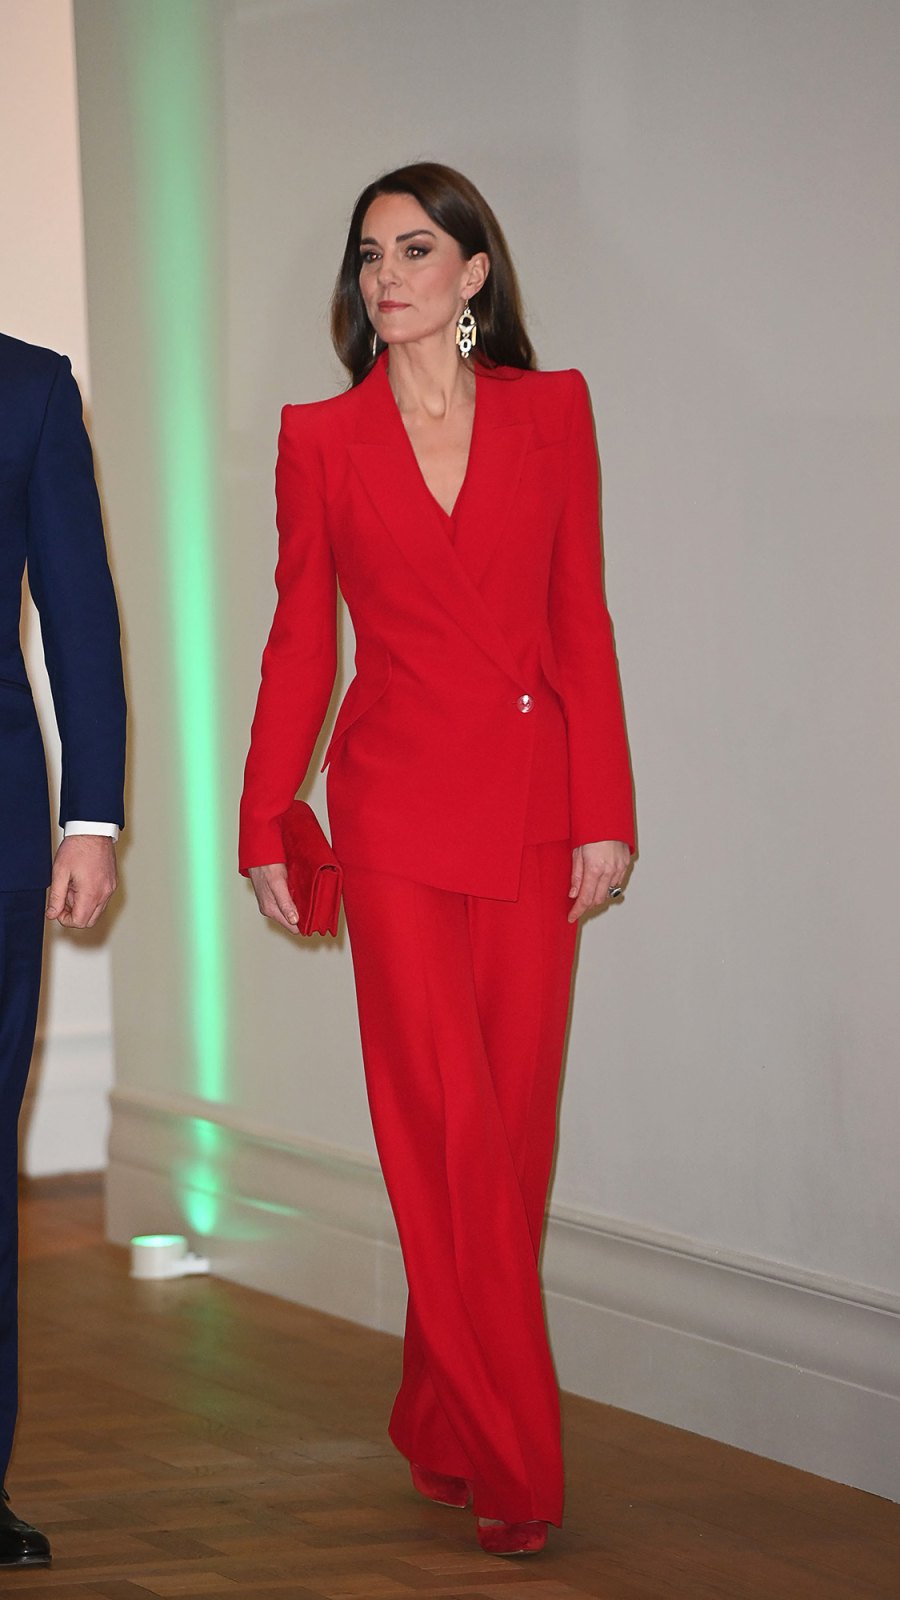 Princess Kate Leaves an Impression With Stunning Red Pantsuit at BAFTA Event Ahead of Early Years Campaign Launch - Shaping Us Campaign